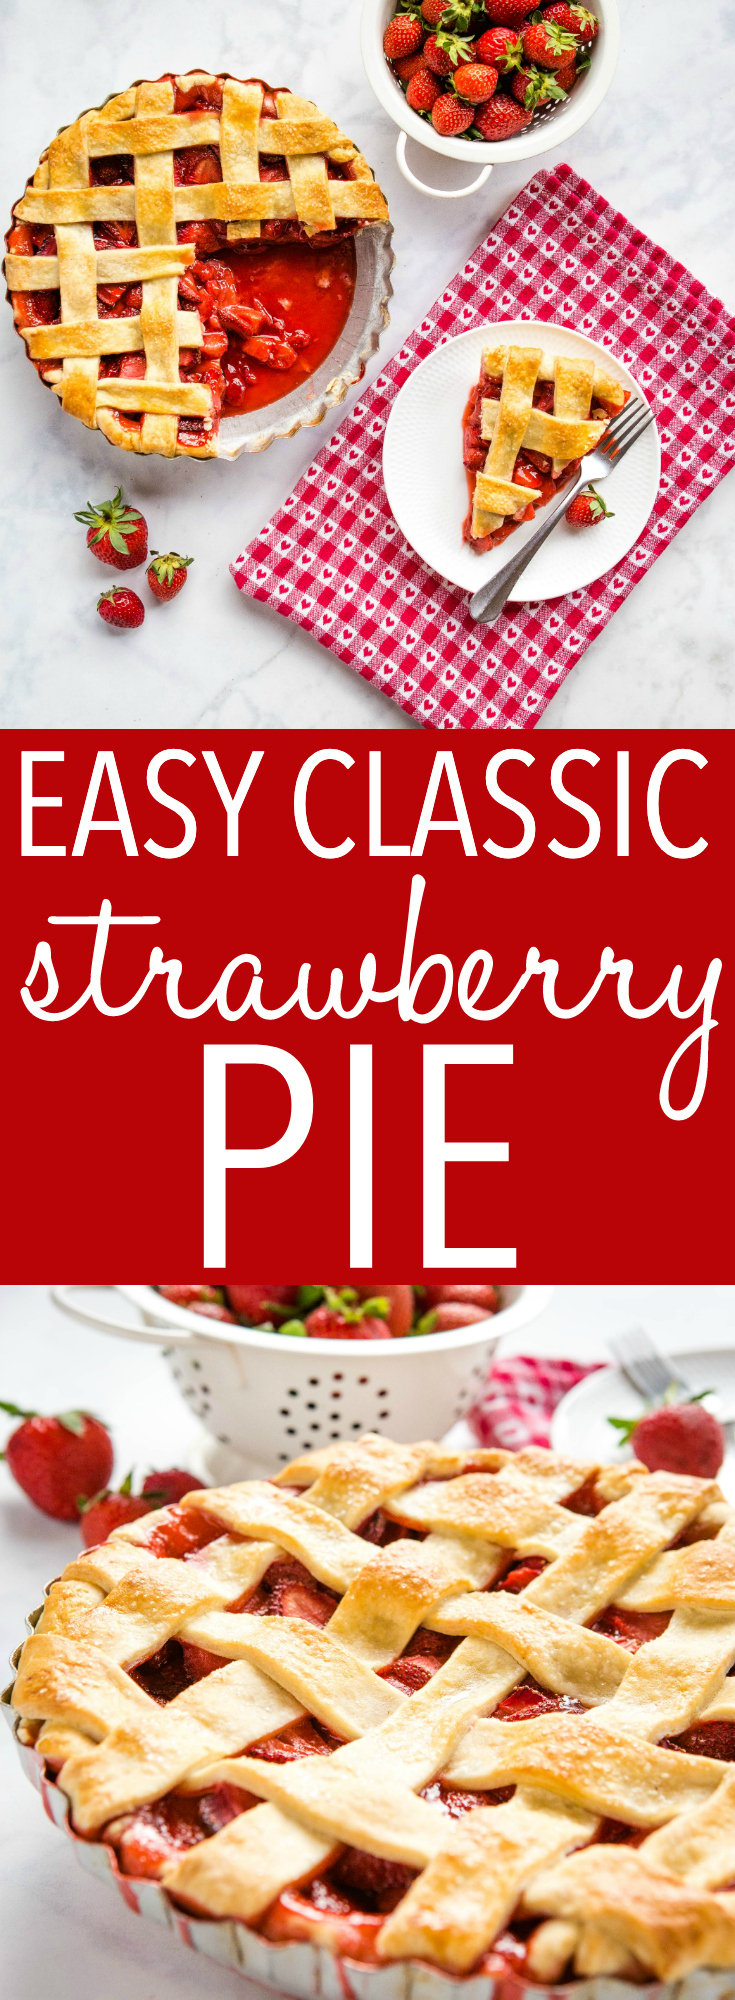 This Classic Strawberry Pie is the perfect summer dessert recipe made with an all-butter crust and fresh strawberries. It's a simple pie recipe that's easy enough for anyone to make - even beginners! Be sure to follow my pro tips below for the perfect old fashioned strawberry pie! Recipe from thebusybaker.ca! #pie #strawberries #strawberrypie #homemade #homesteading #oldfashionedpie #classicrecipe #homemade #dessert #simple #fruit #berries via @busybakerblog